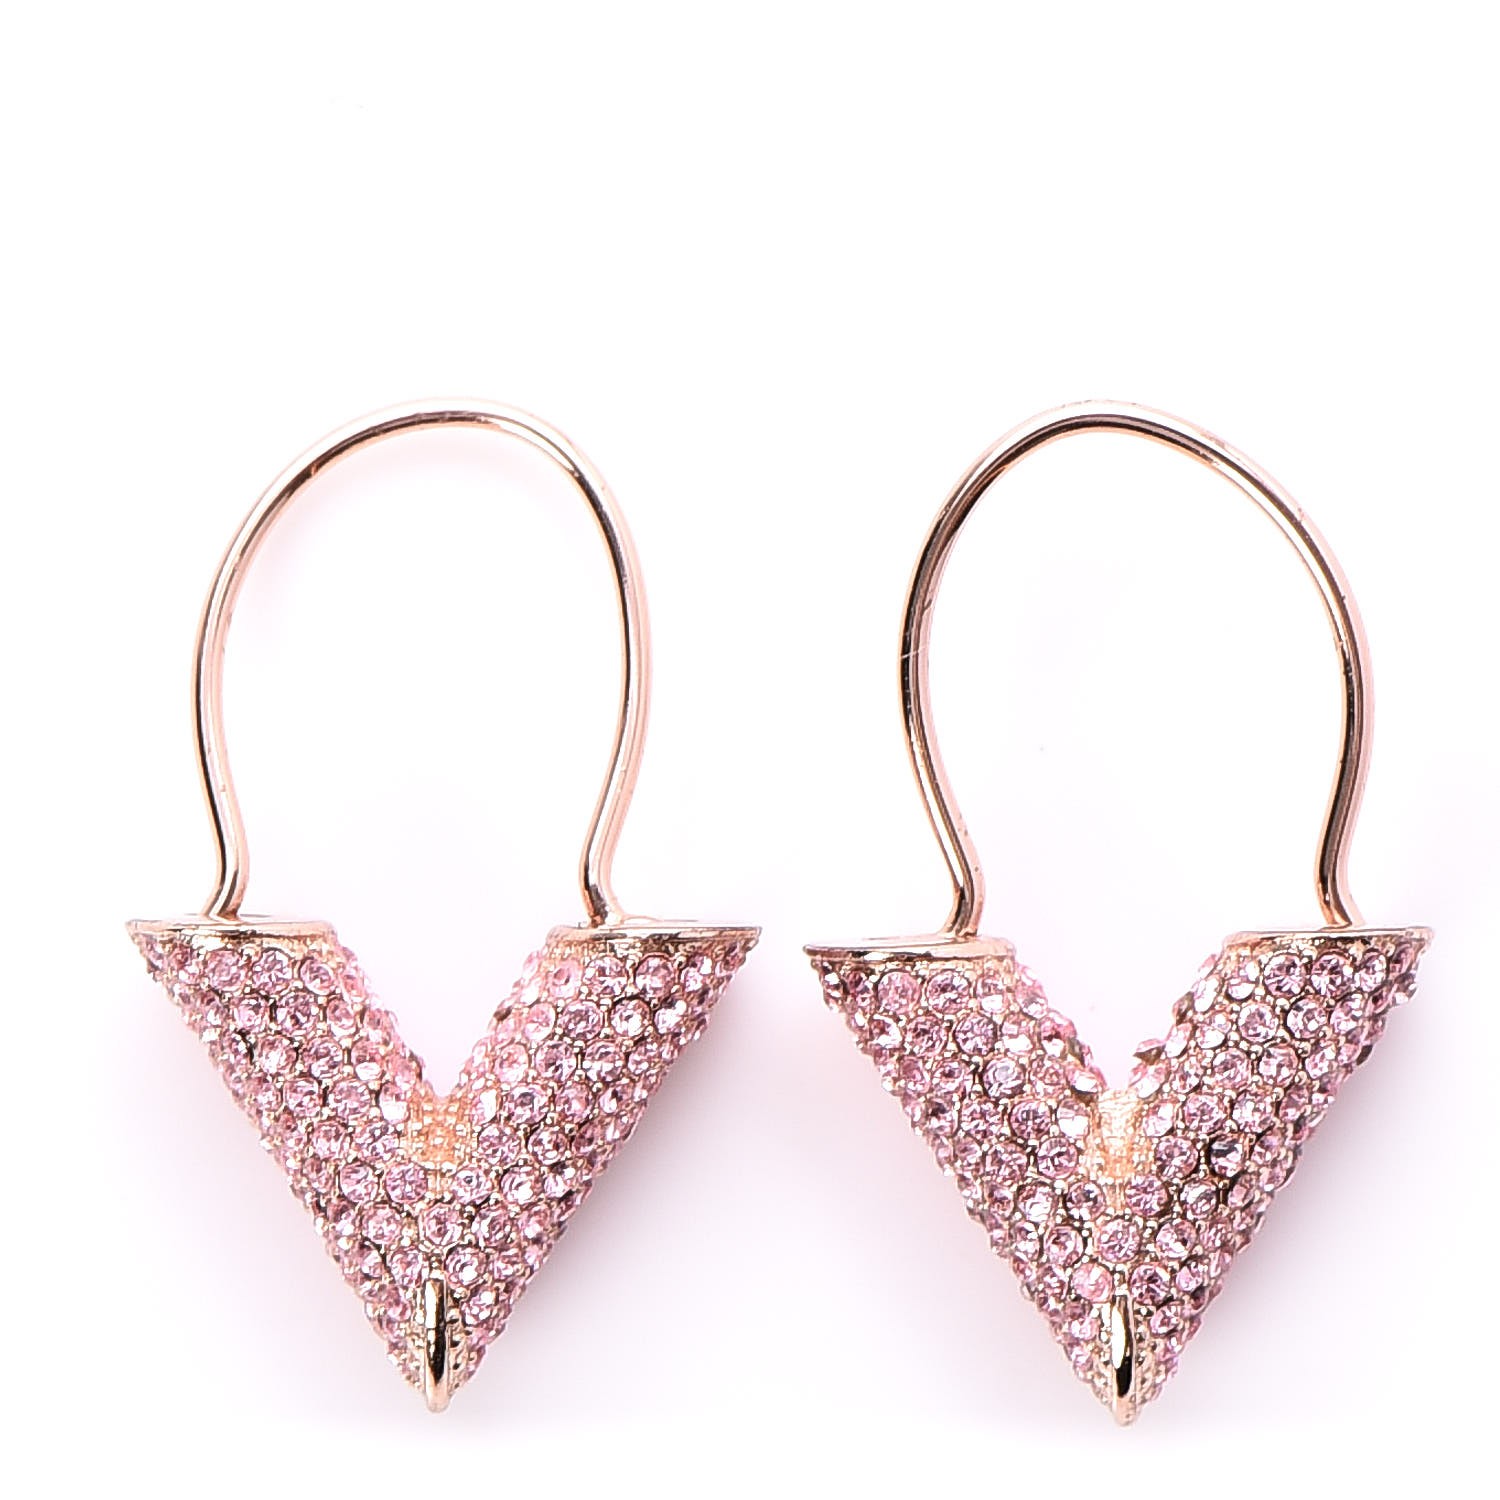 LOUIS VUITTON Crystal Essential V Strass Earrings Pink Gold 242550 |